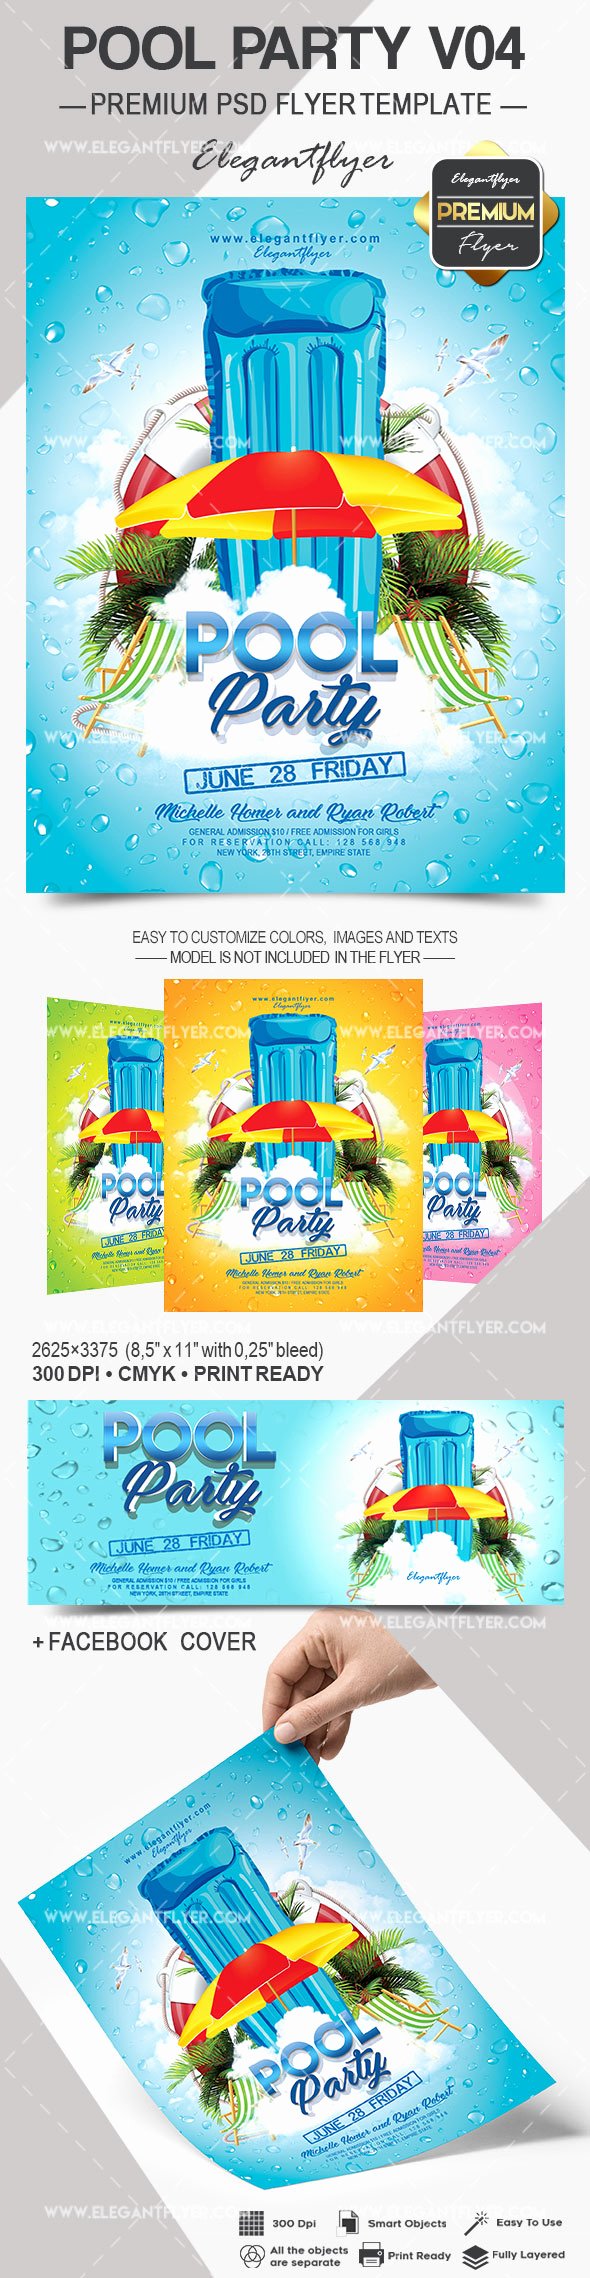 Pool Party Flyer Template Free Luxury Pool Party V04 – Flyer Psd Template – by Elegantflyer